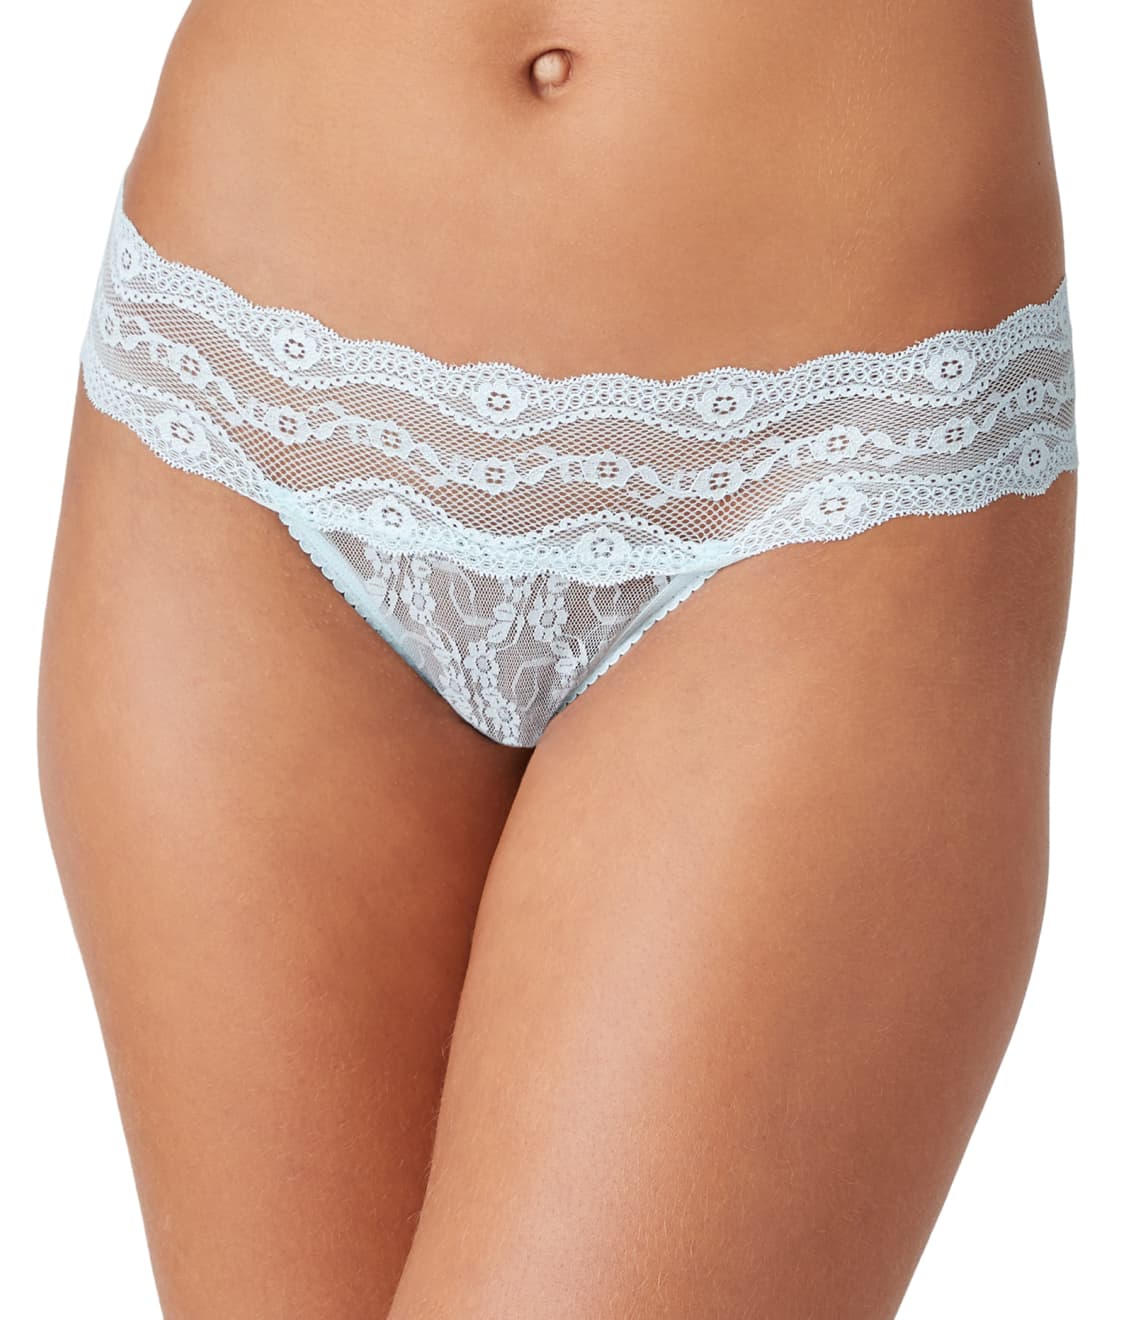 B Tempt'd By Wacoal Lace Kiss Thong Pants Knickers Size M White